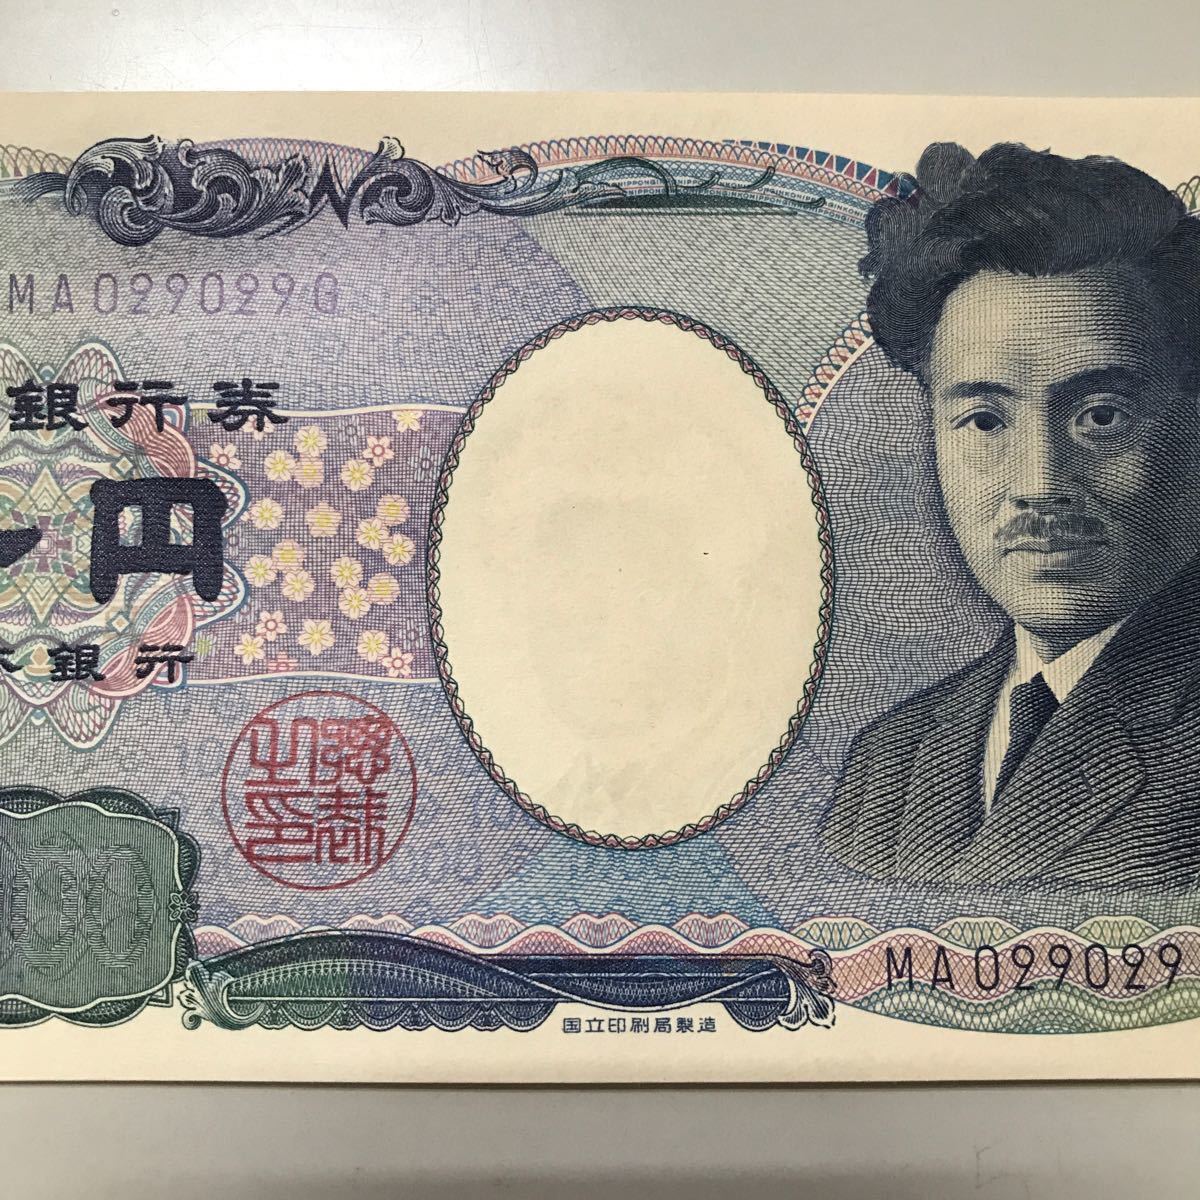  Noguchi britain . thousand jpy .MA029029G.. return number . number repetition number 